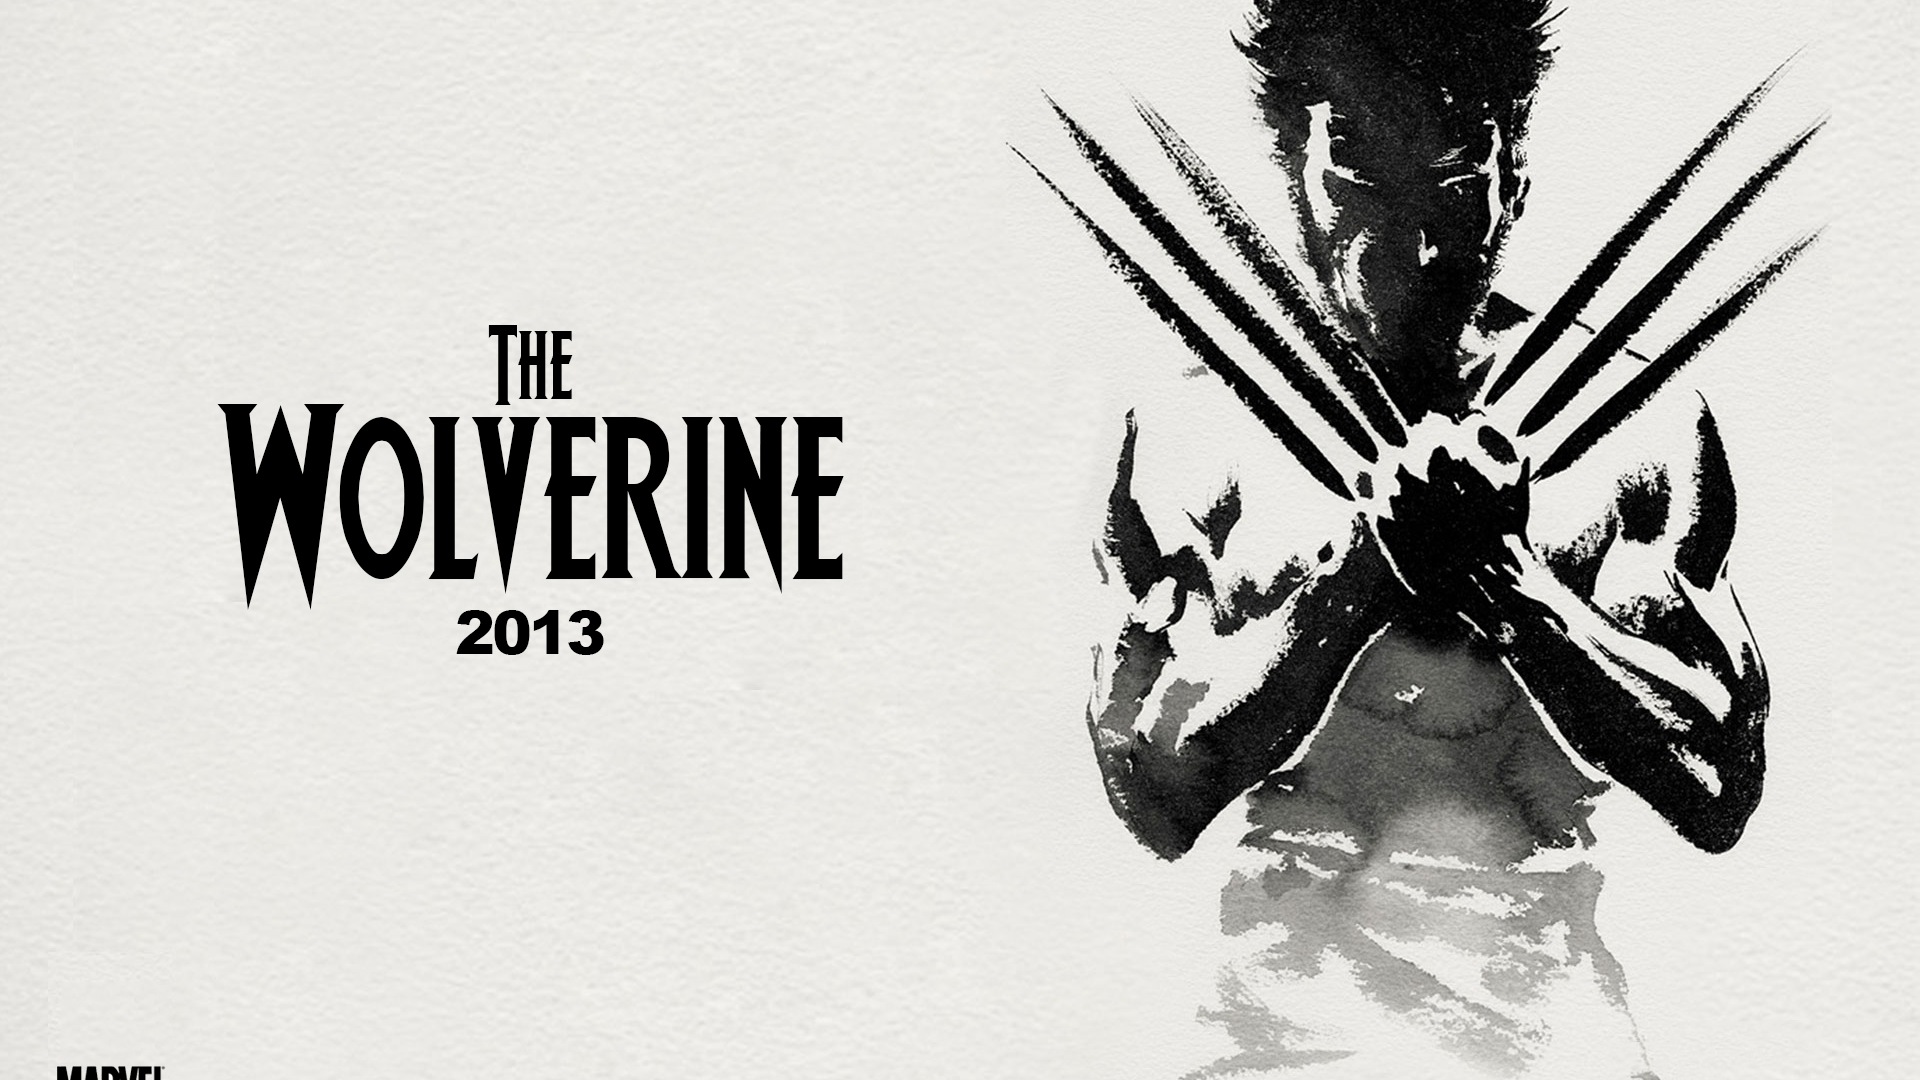 The Wolverine 2013 HD wallpapers #16 - 1920x1080